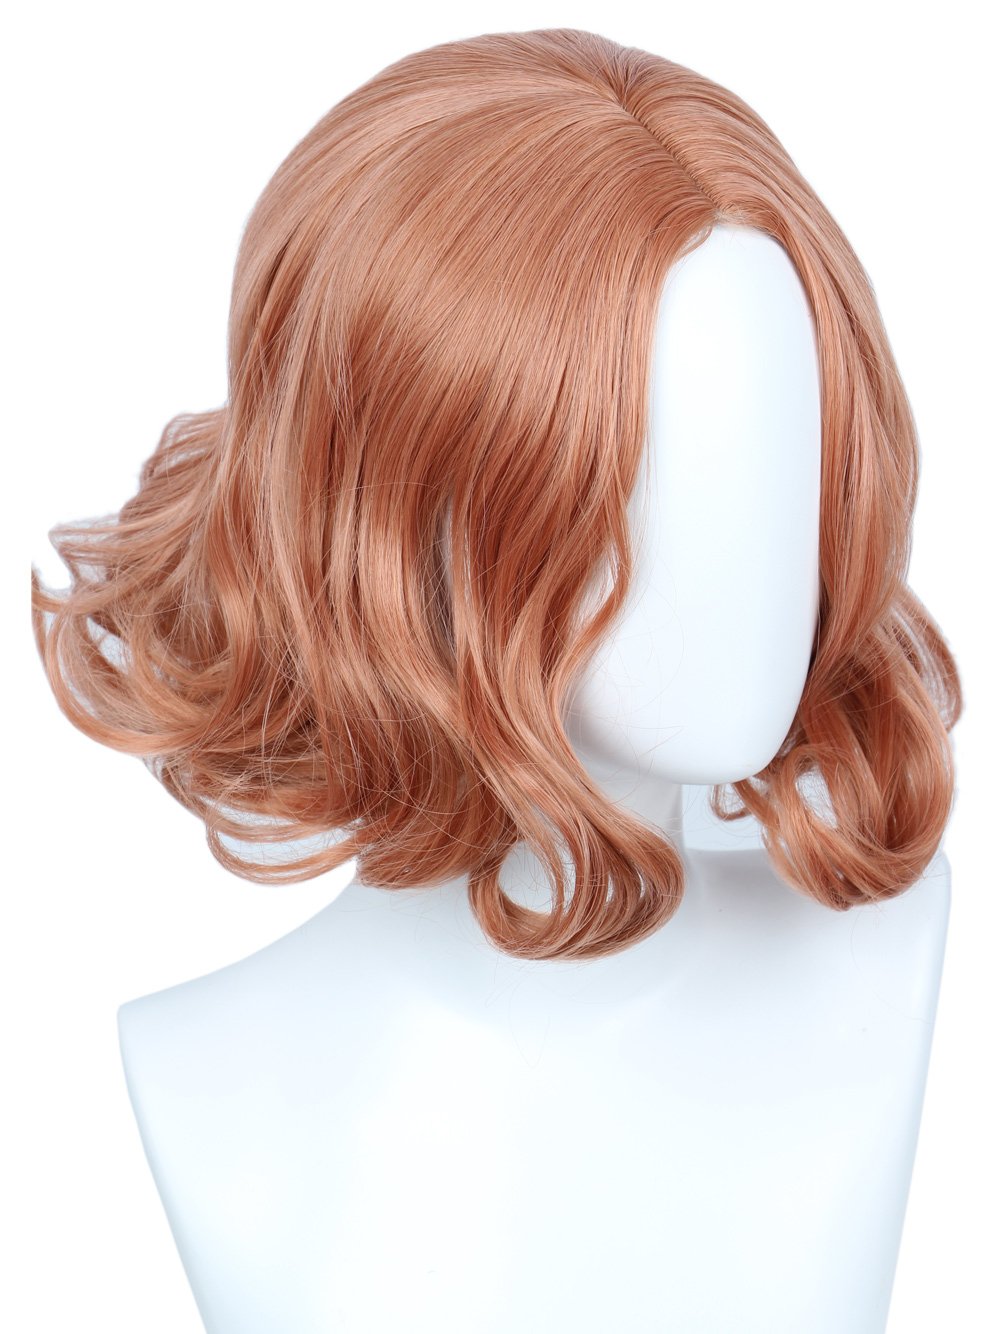 Price:$17.89    Linfairy Short Pink Curly Wig for Women Halloween Costume Wig p5  Beauty